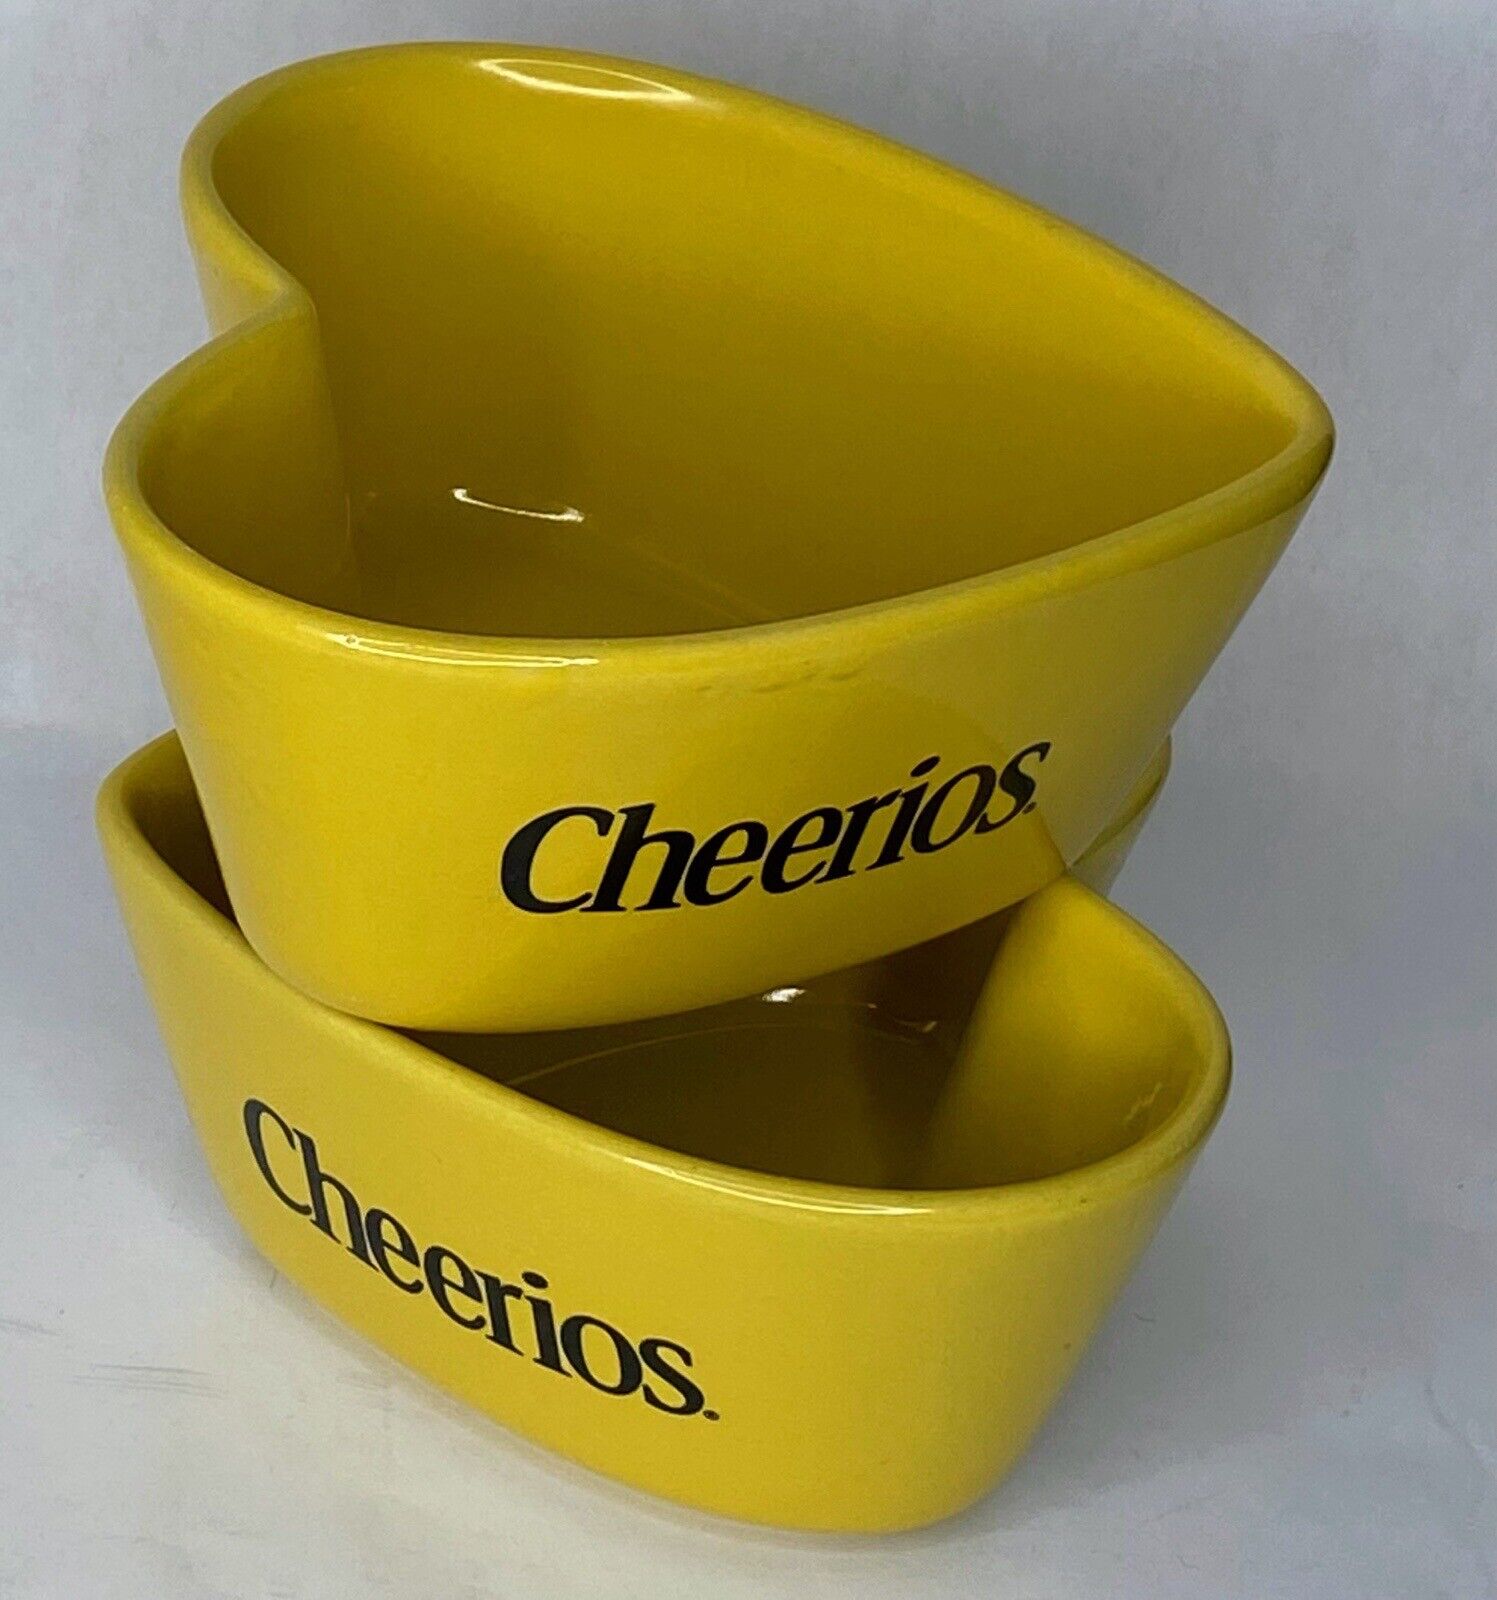 Cheerios Pair of Heart Shaped Yellow Bowls Ceramic General Mills Cereal 2003